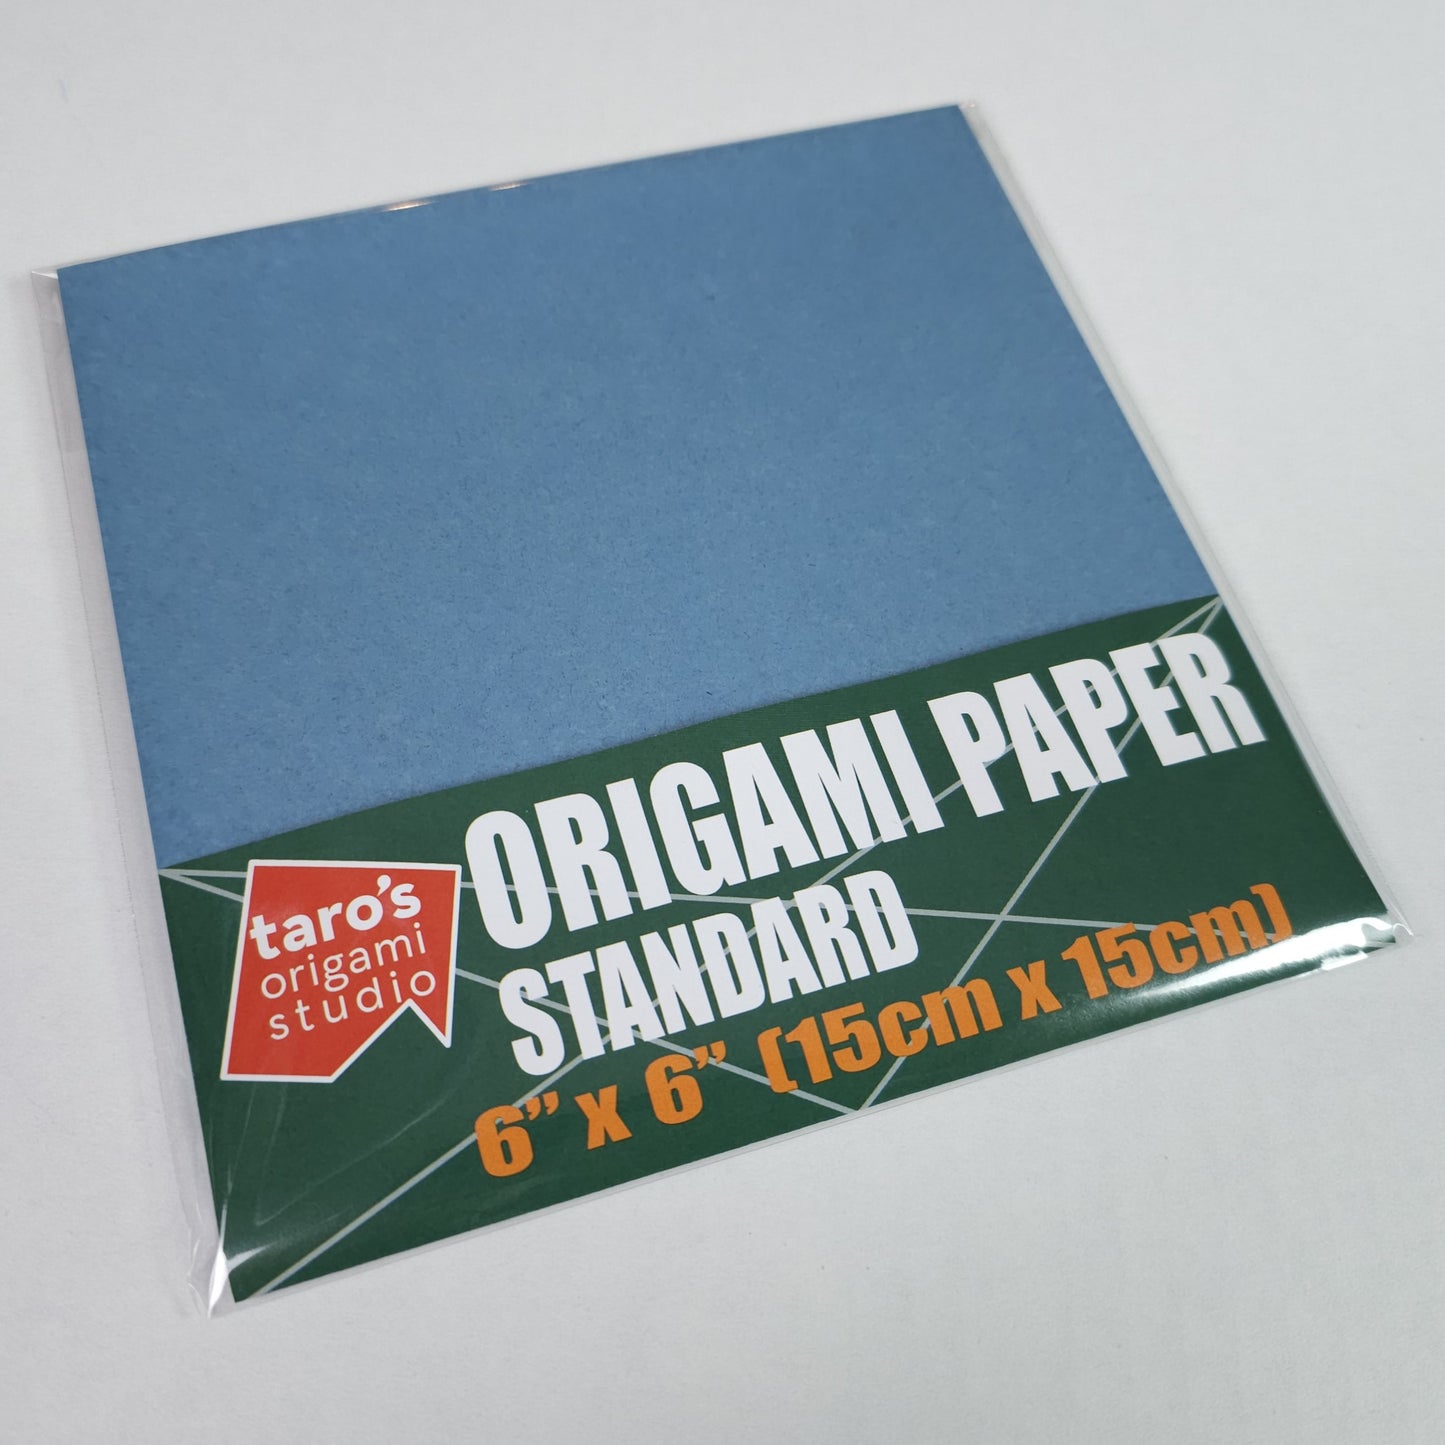 Standard 6 Inch One Sided Single Color (Blue Grey) 50 Sheets (All Same Color) Square Easy Fold Premium Japanese Paper for Beginner (Made in Japan)